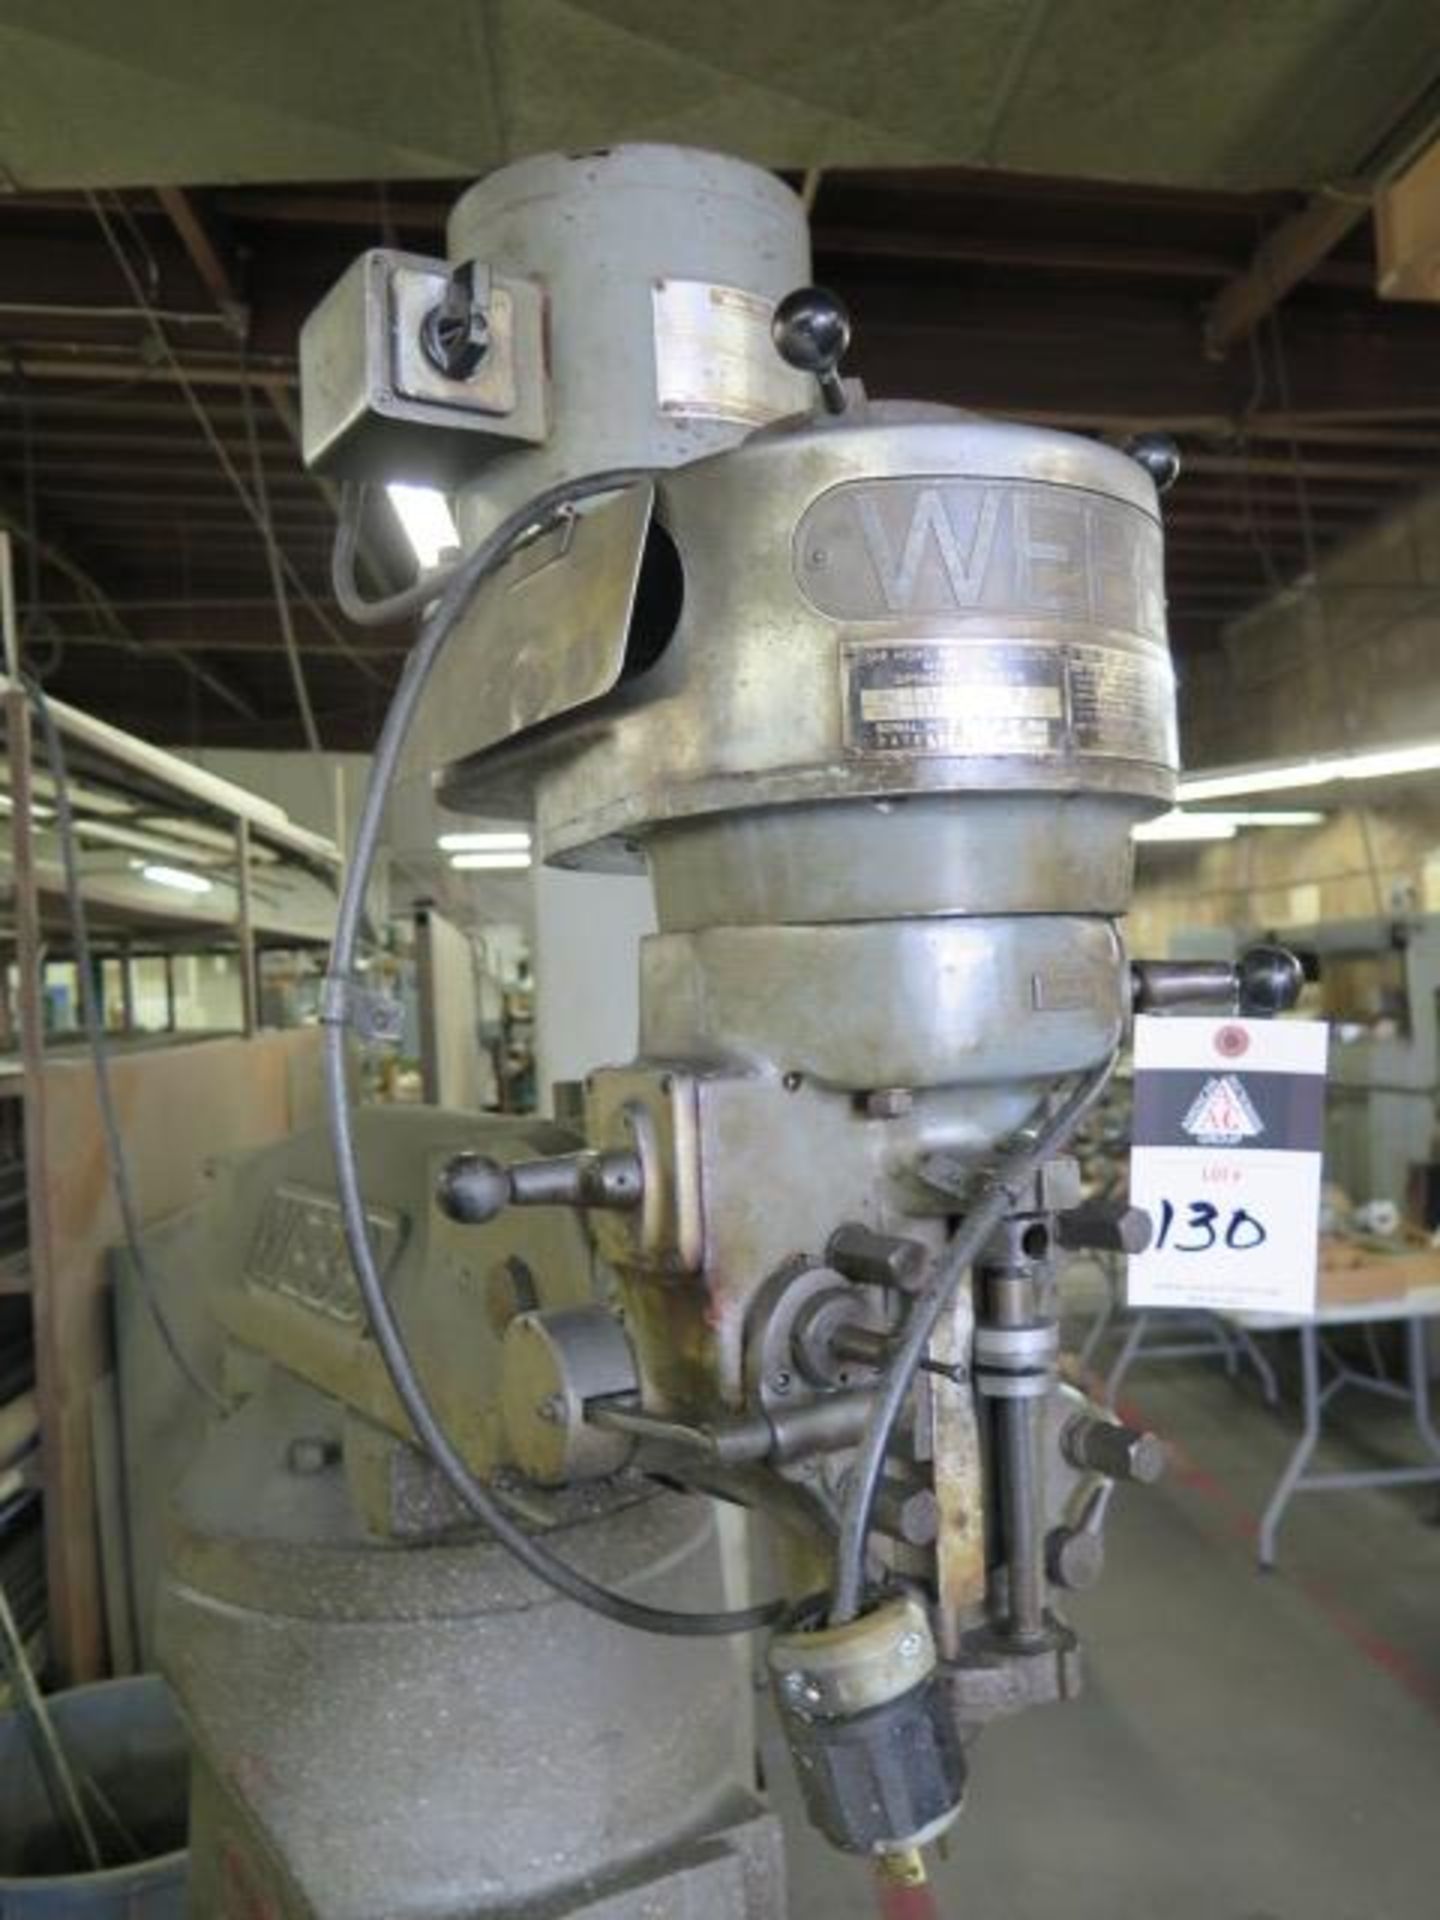 Webb Vertical Mill w/ 1Hp Motor, 80-2720 RPM, Power Feed, 9” x 47” Table (SOLD AS-IS - NO WARRANTY) - Image 4 of 7